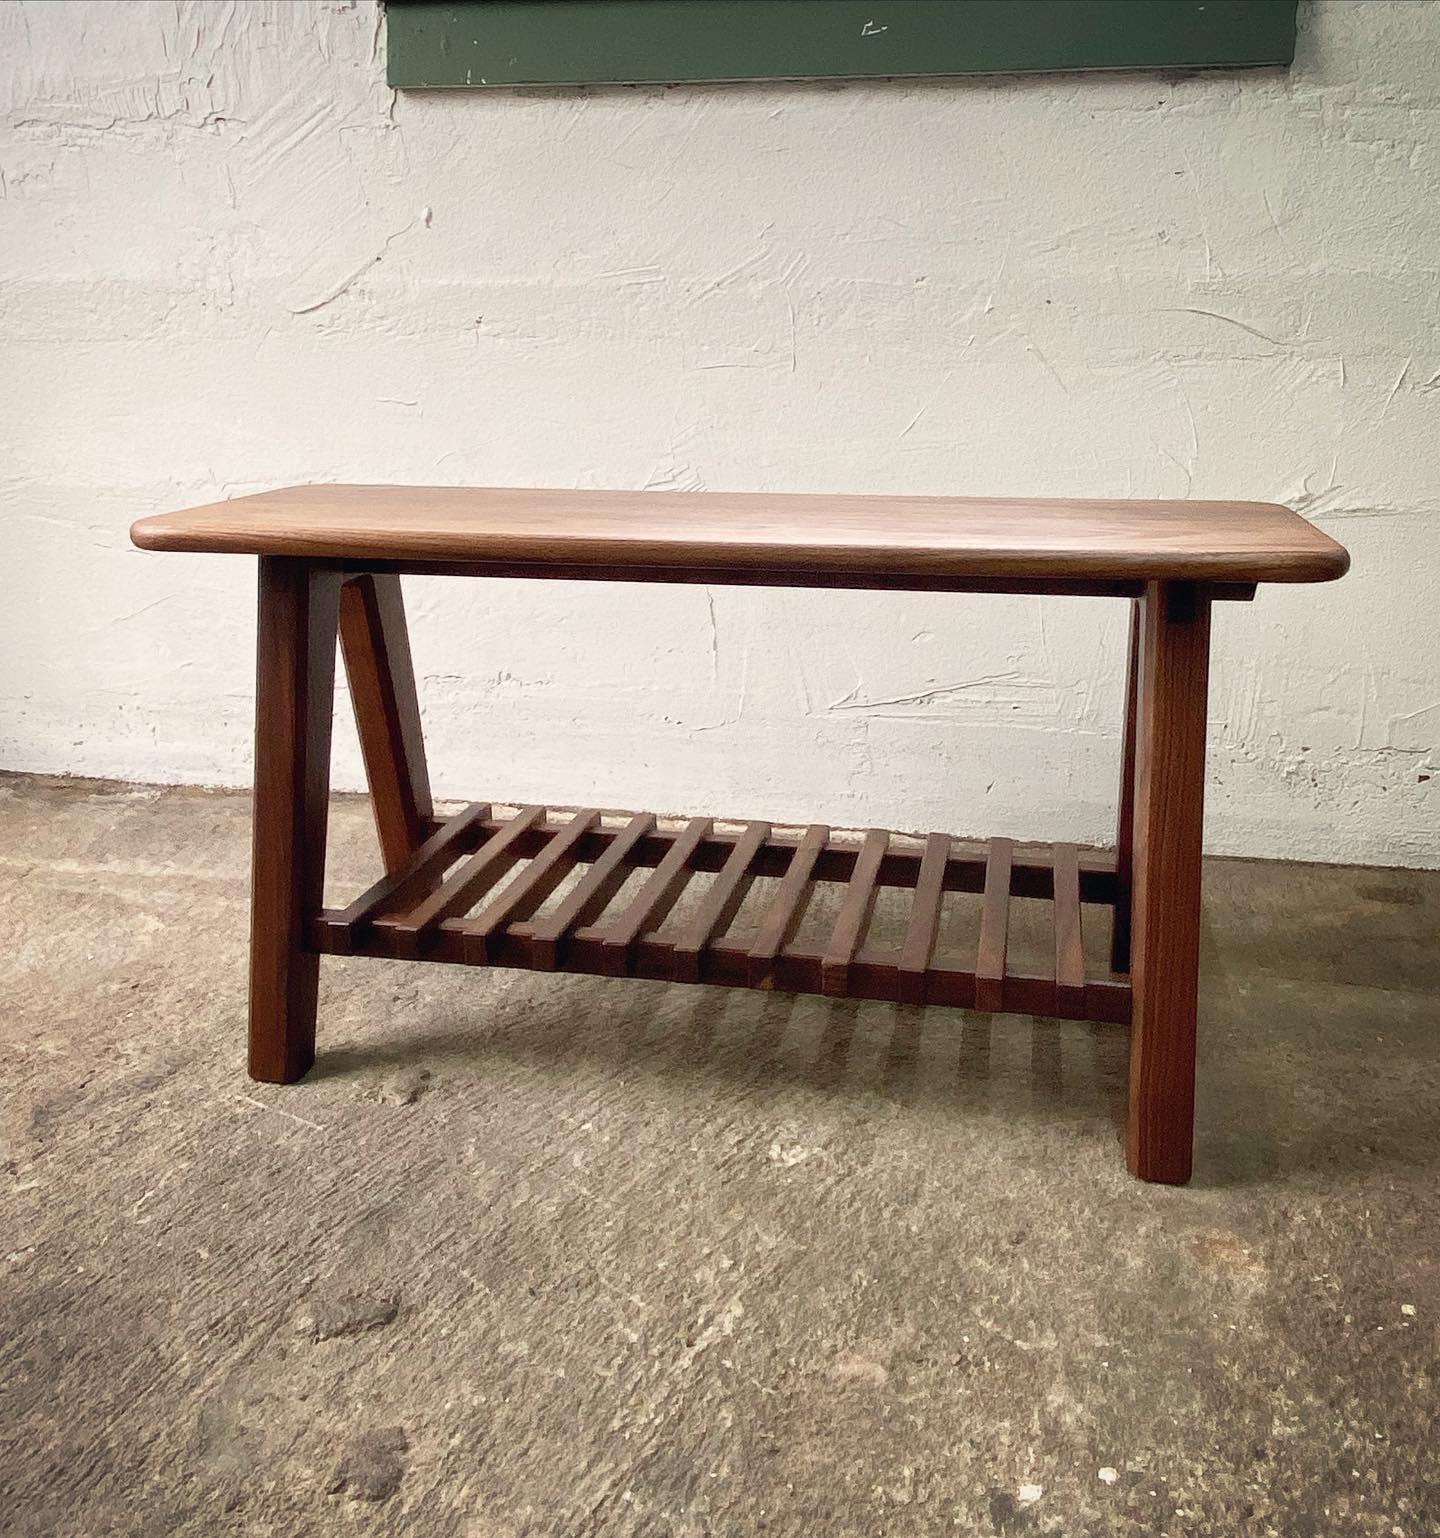 Handmade Stroll Bench from Liminal Studio, Walnut, White Oak In New Condition For Sale In Portland, OR